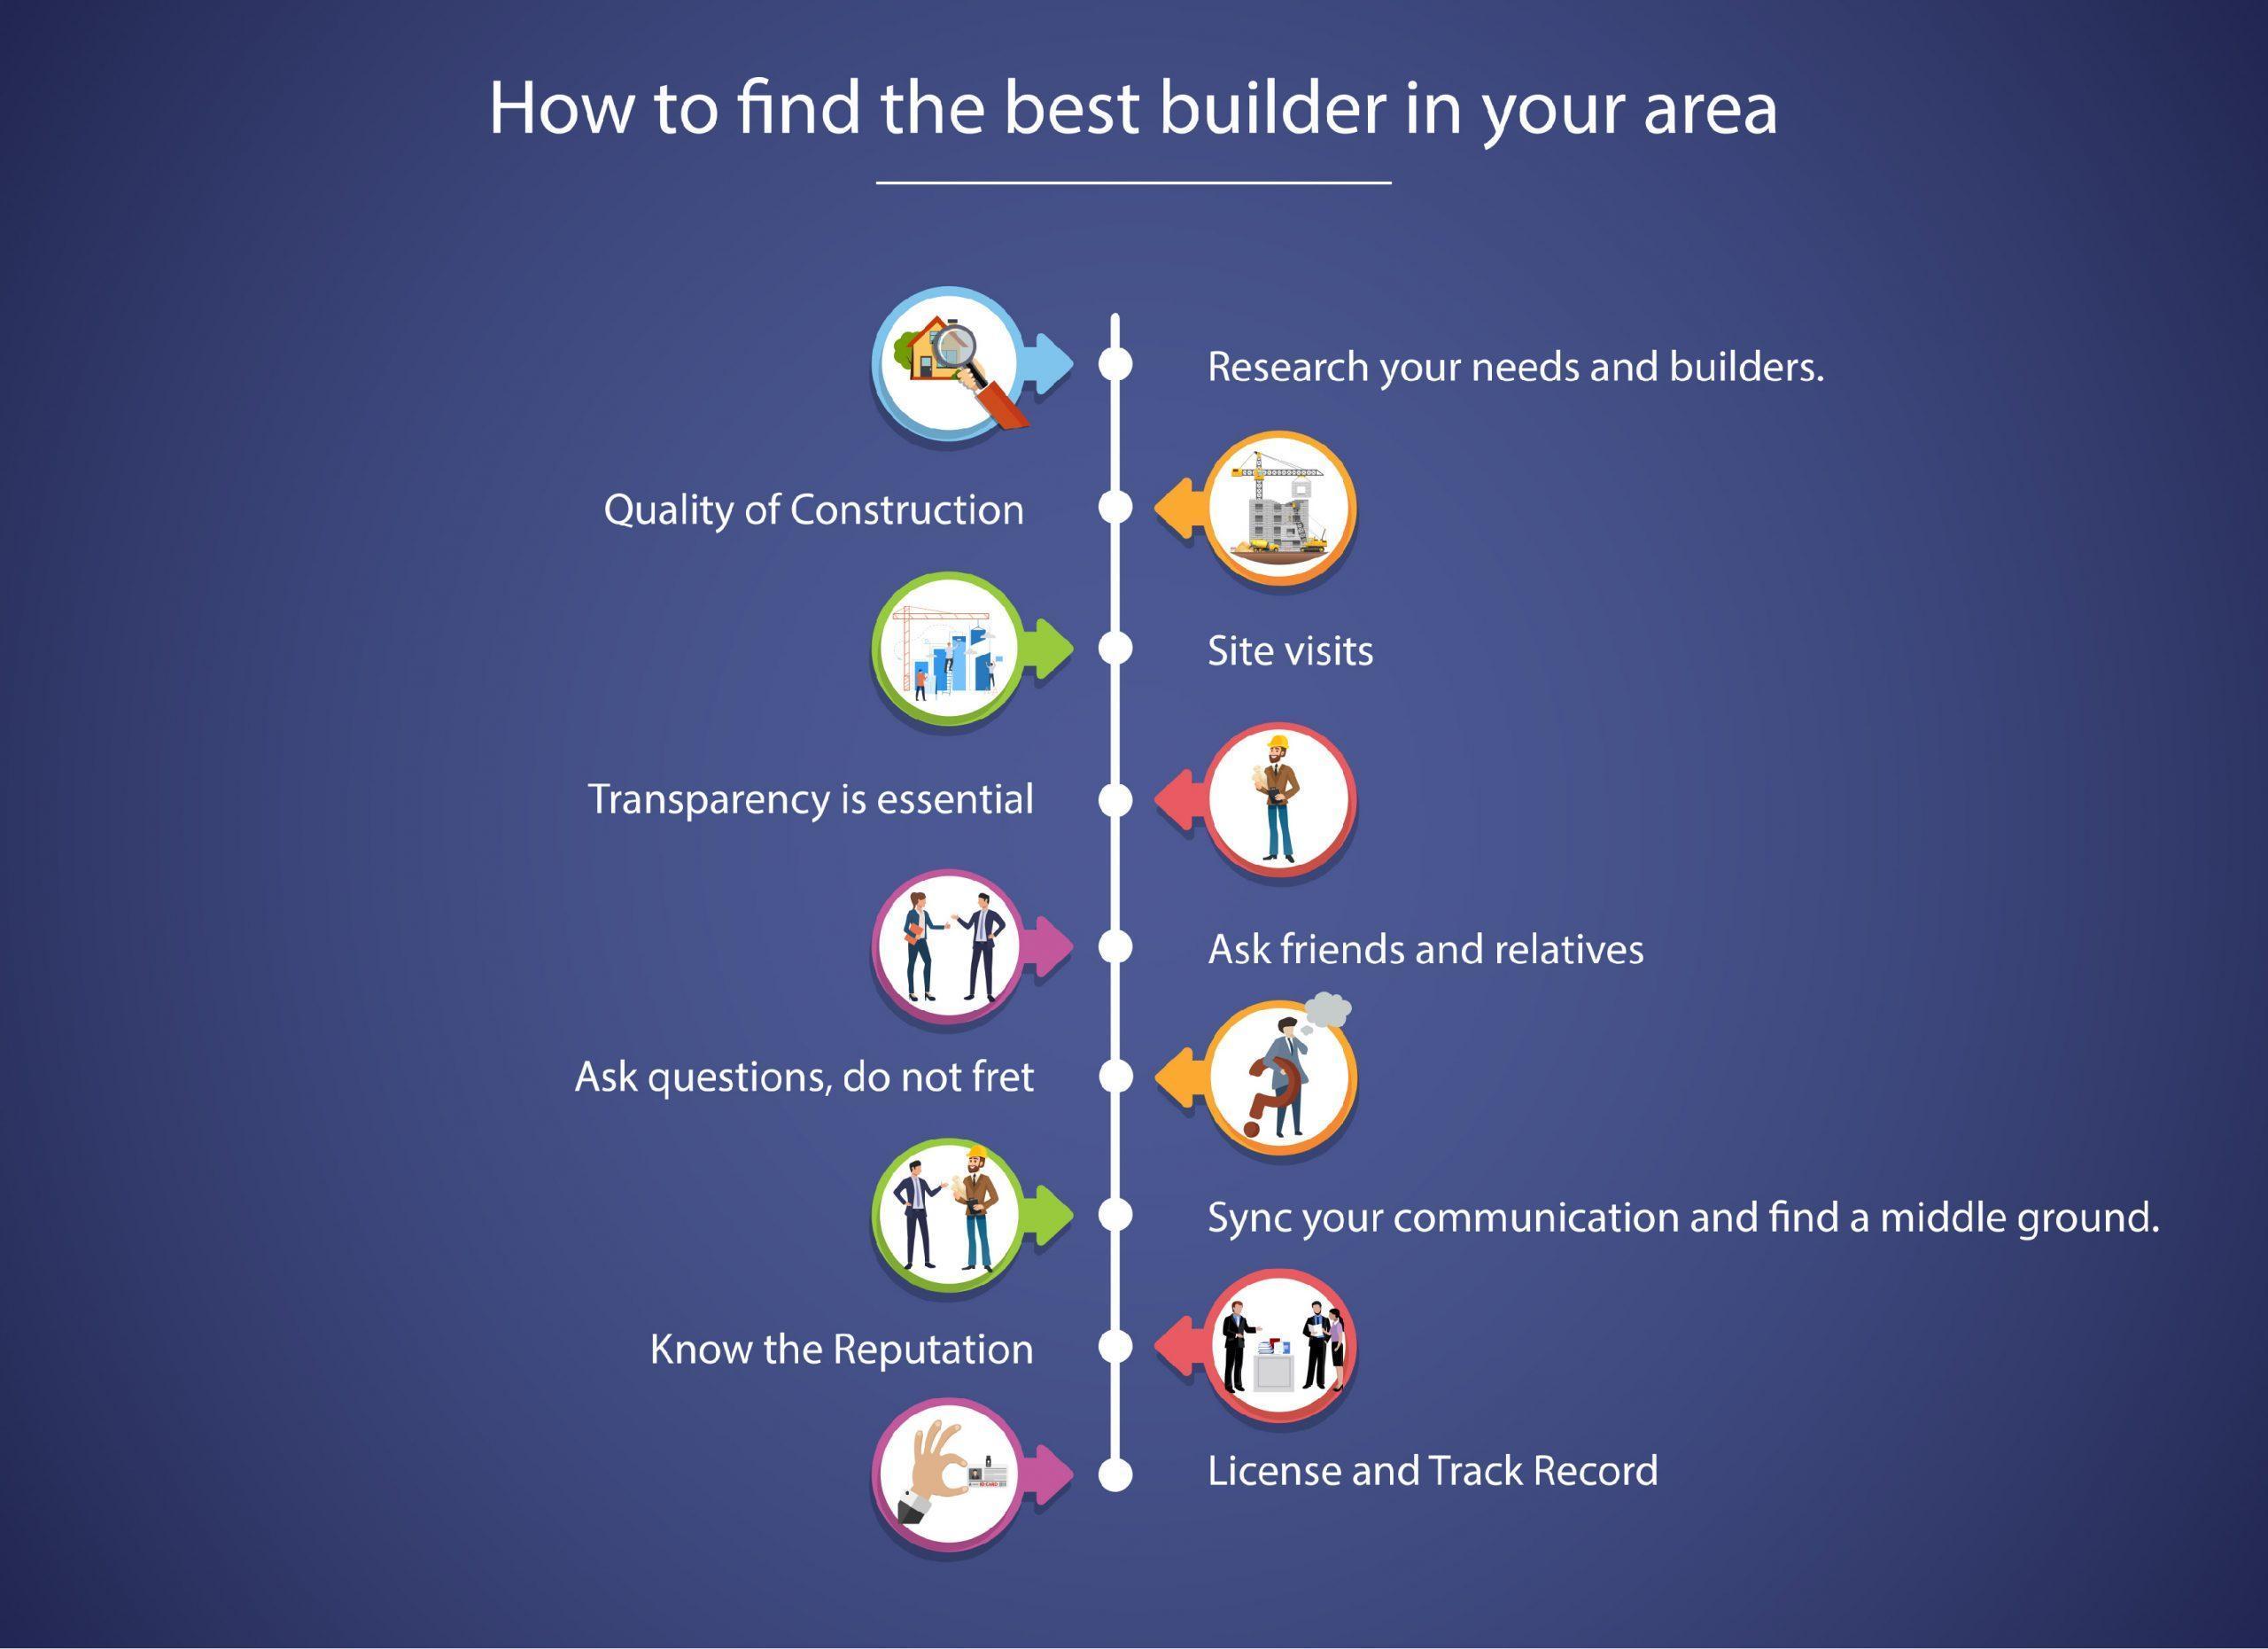 How to find the best builder in your area?